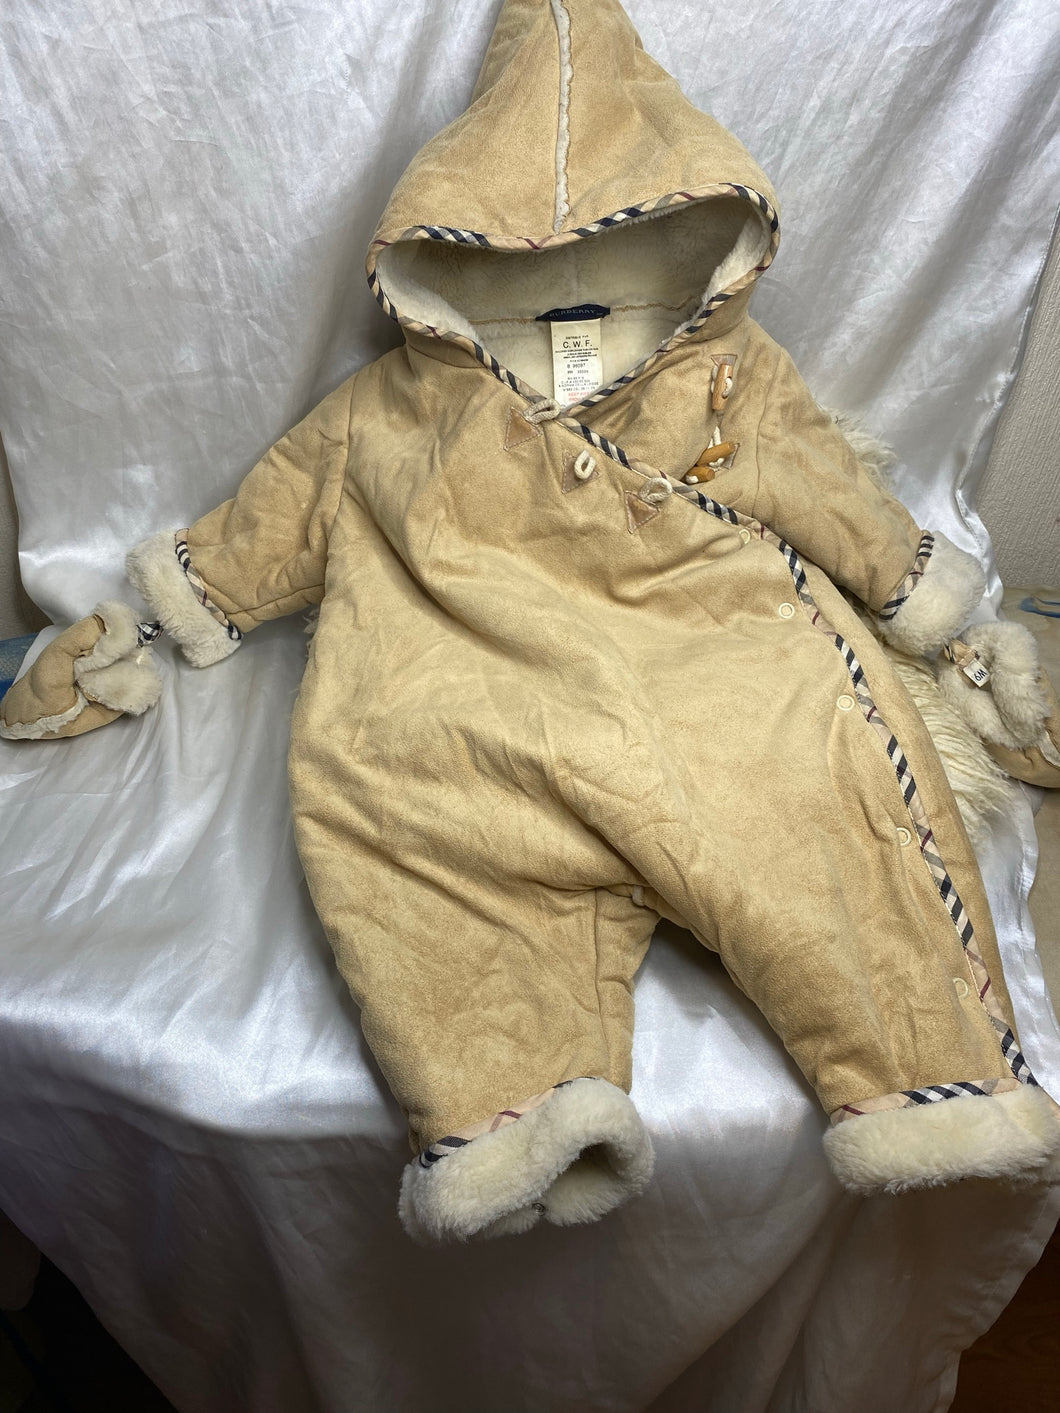 Burberry baby winter snowsuit - 6 to 12 months